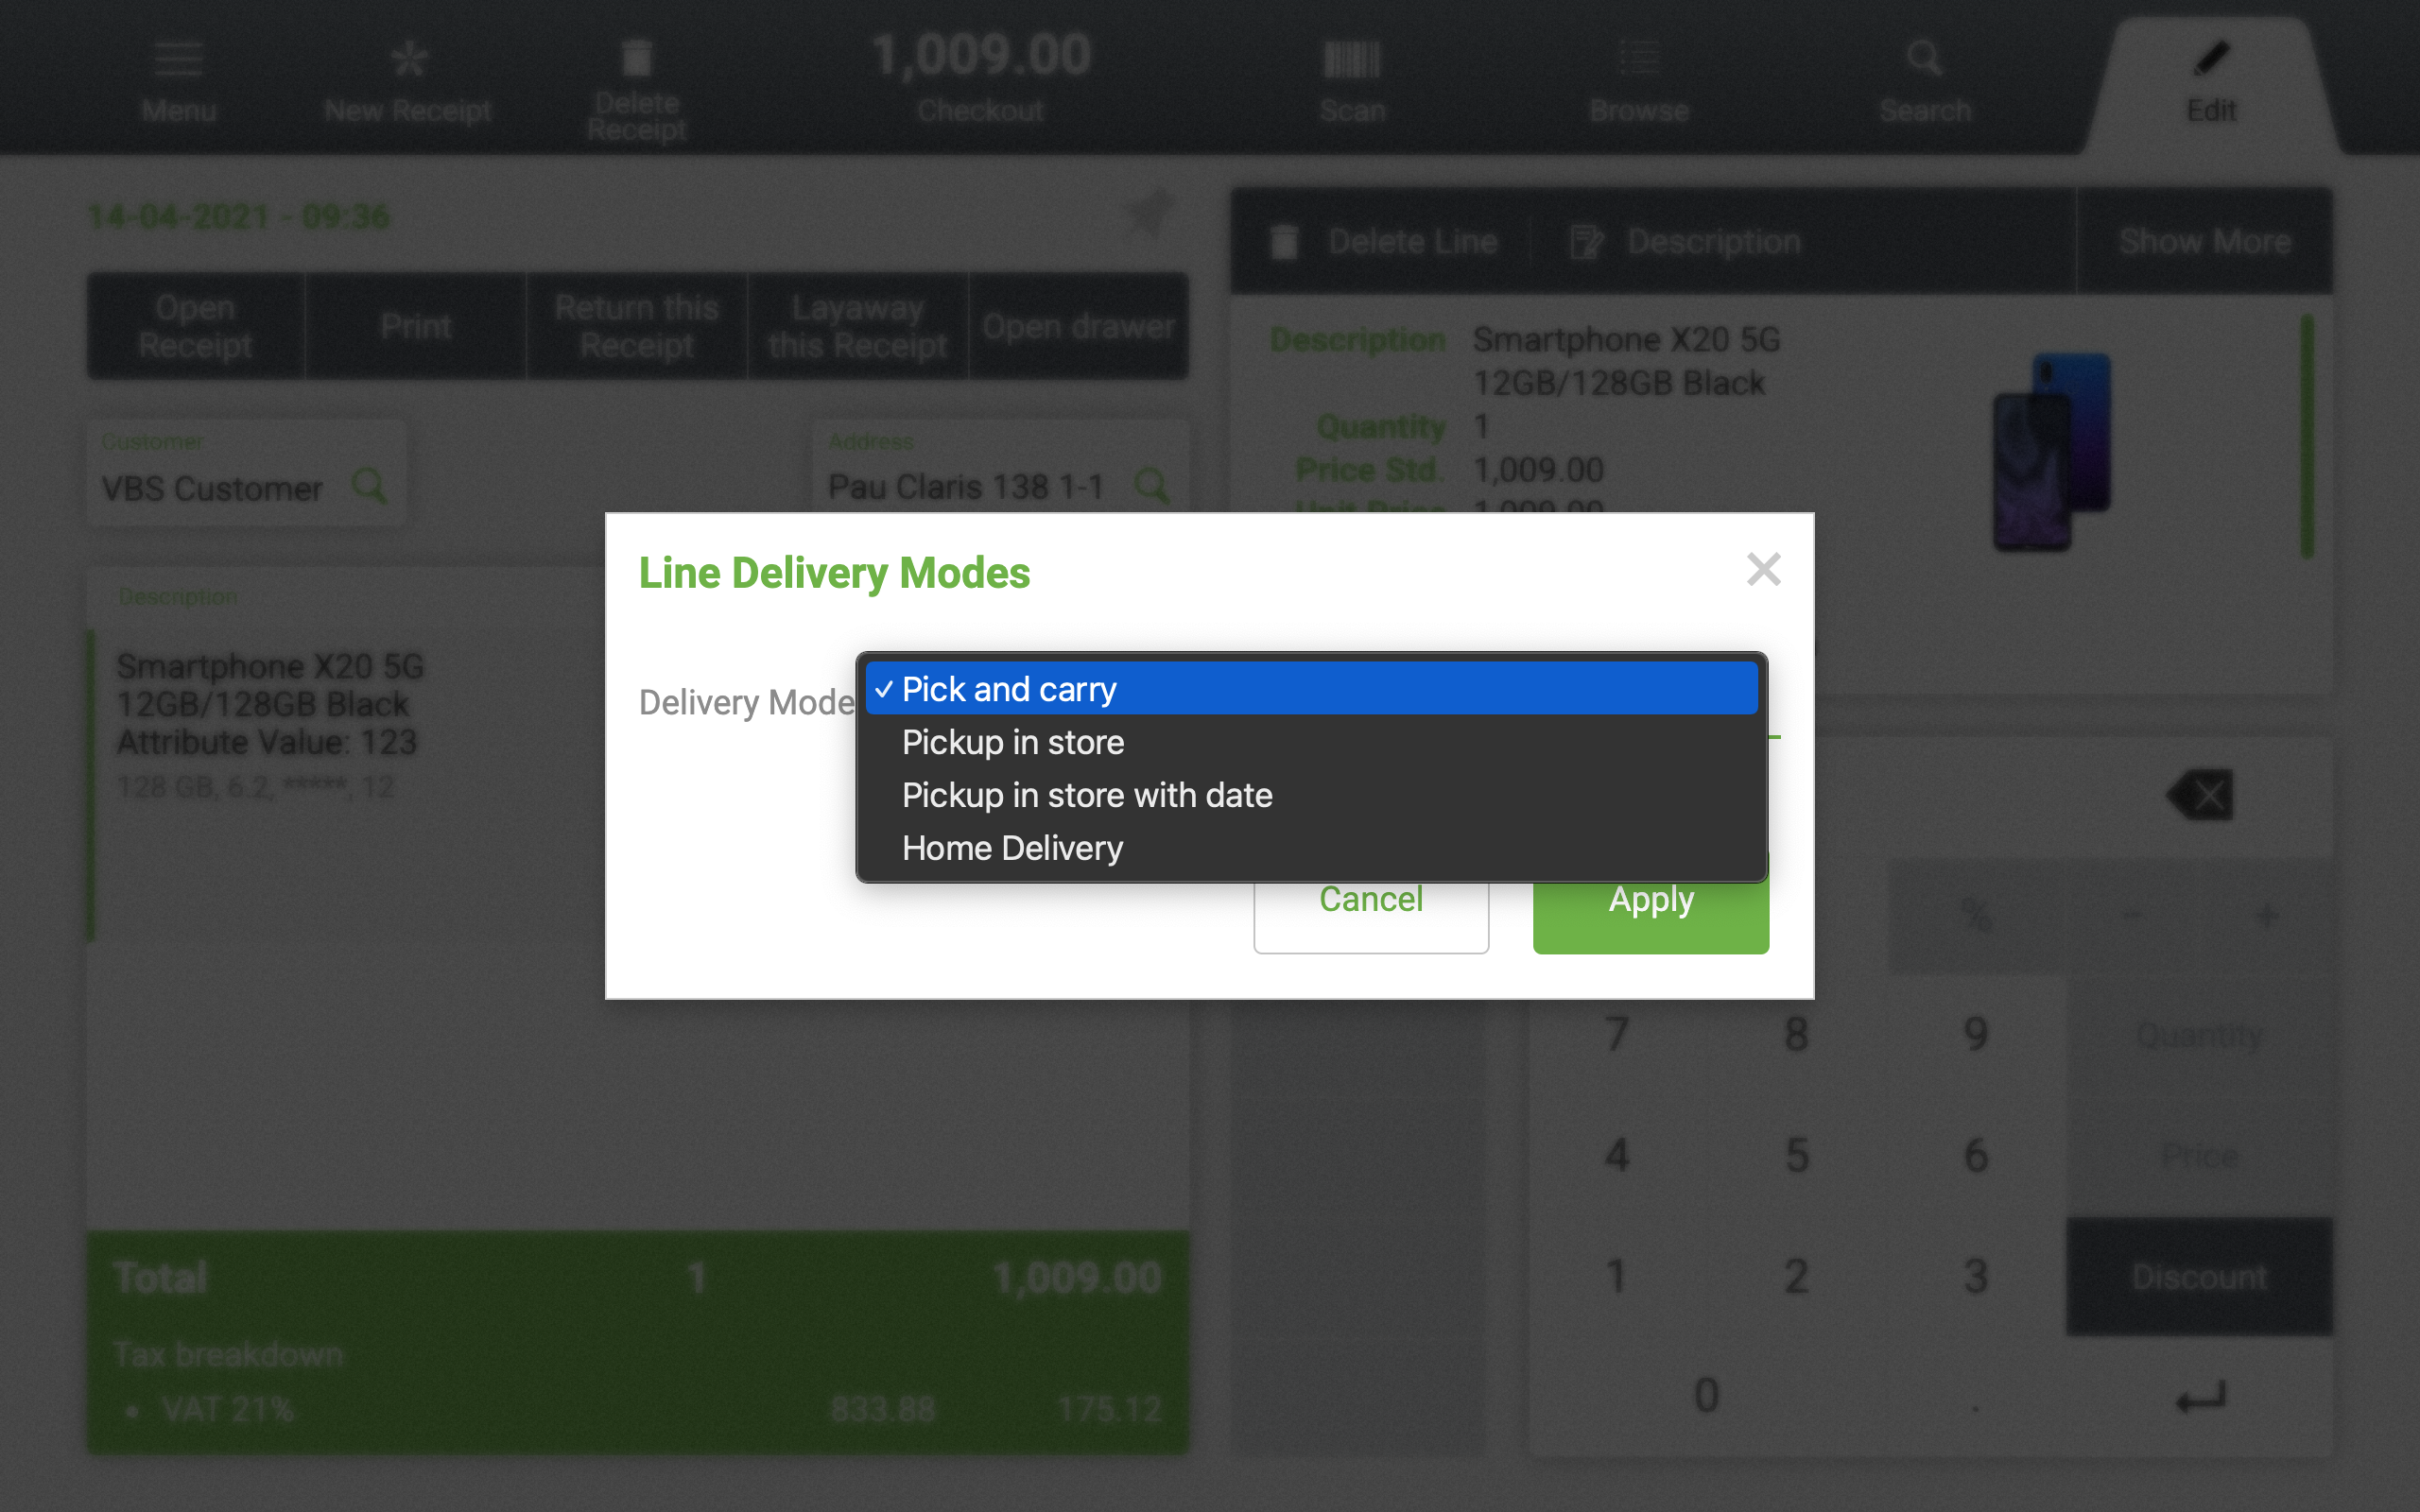 Openbravo Software - Ticket / Line delivery modes